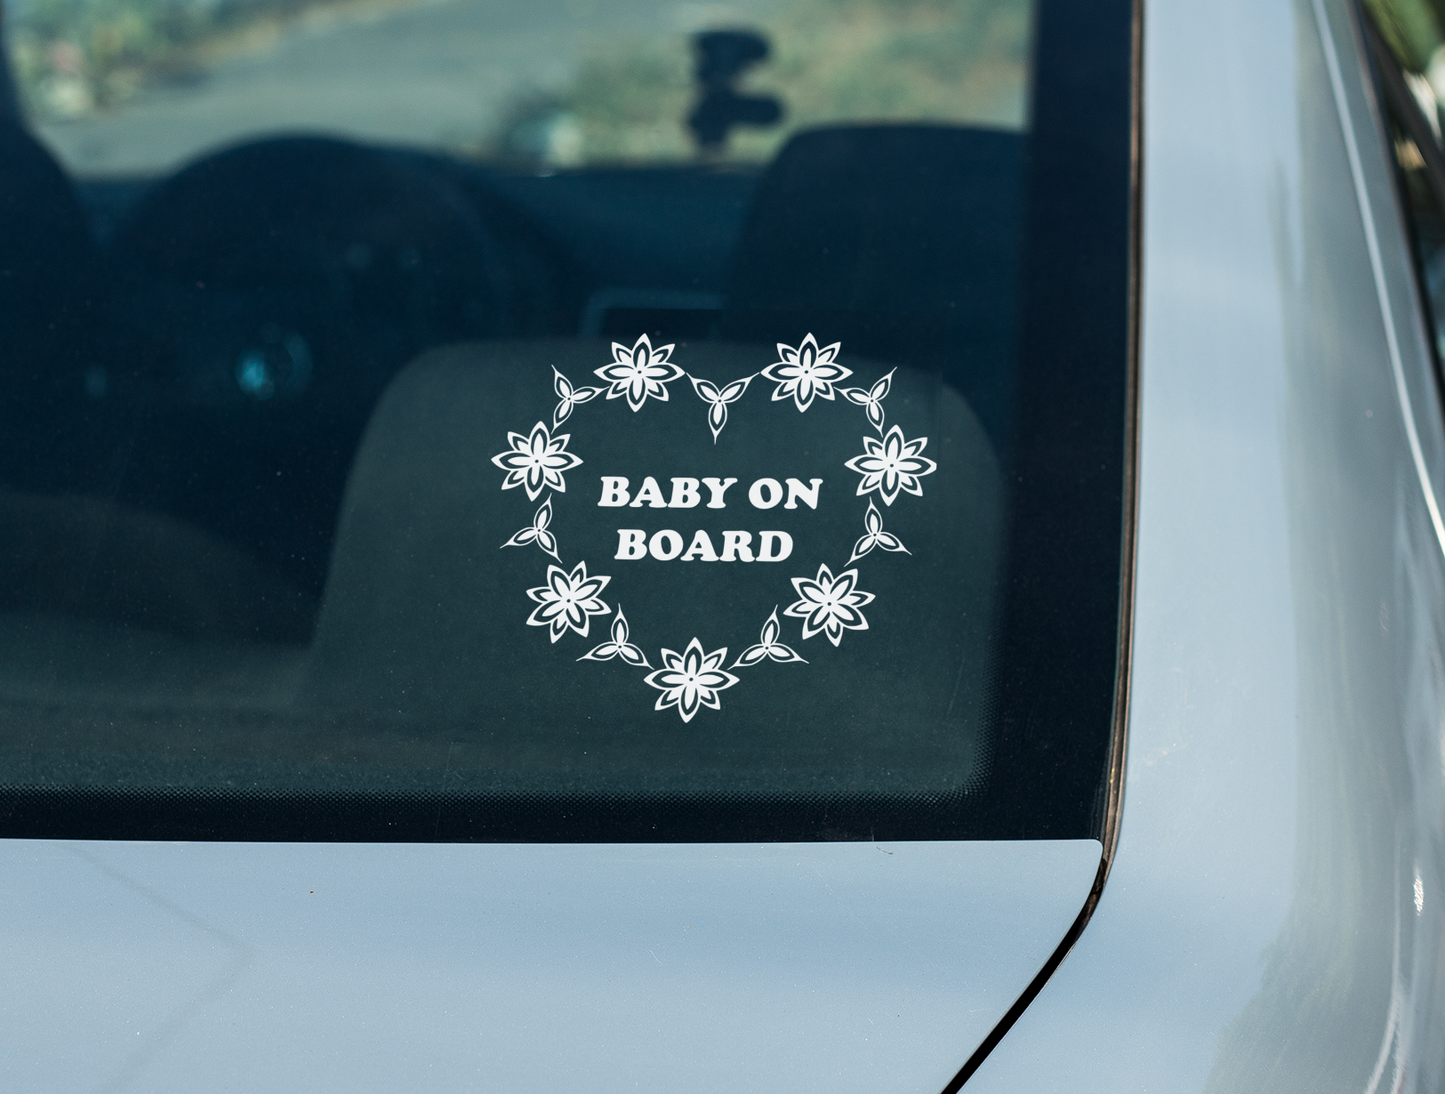 A white decal with the words "Baby on Board"  surrounded by a heart made up of stylized flower motifs